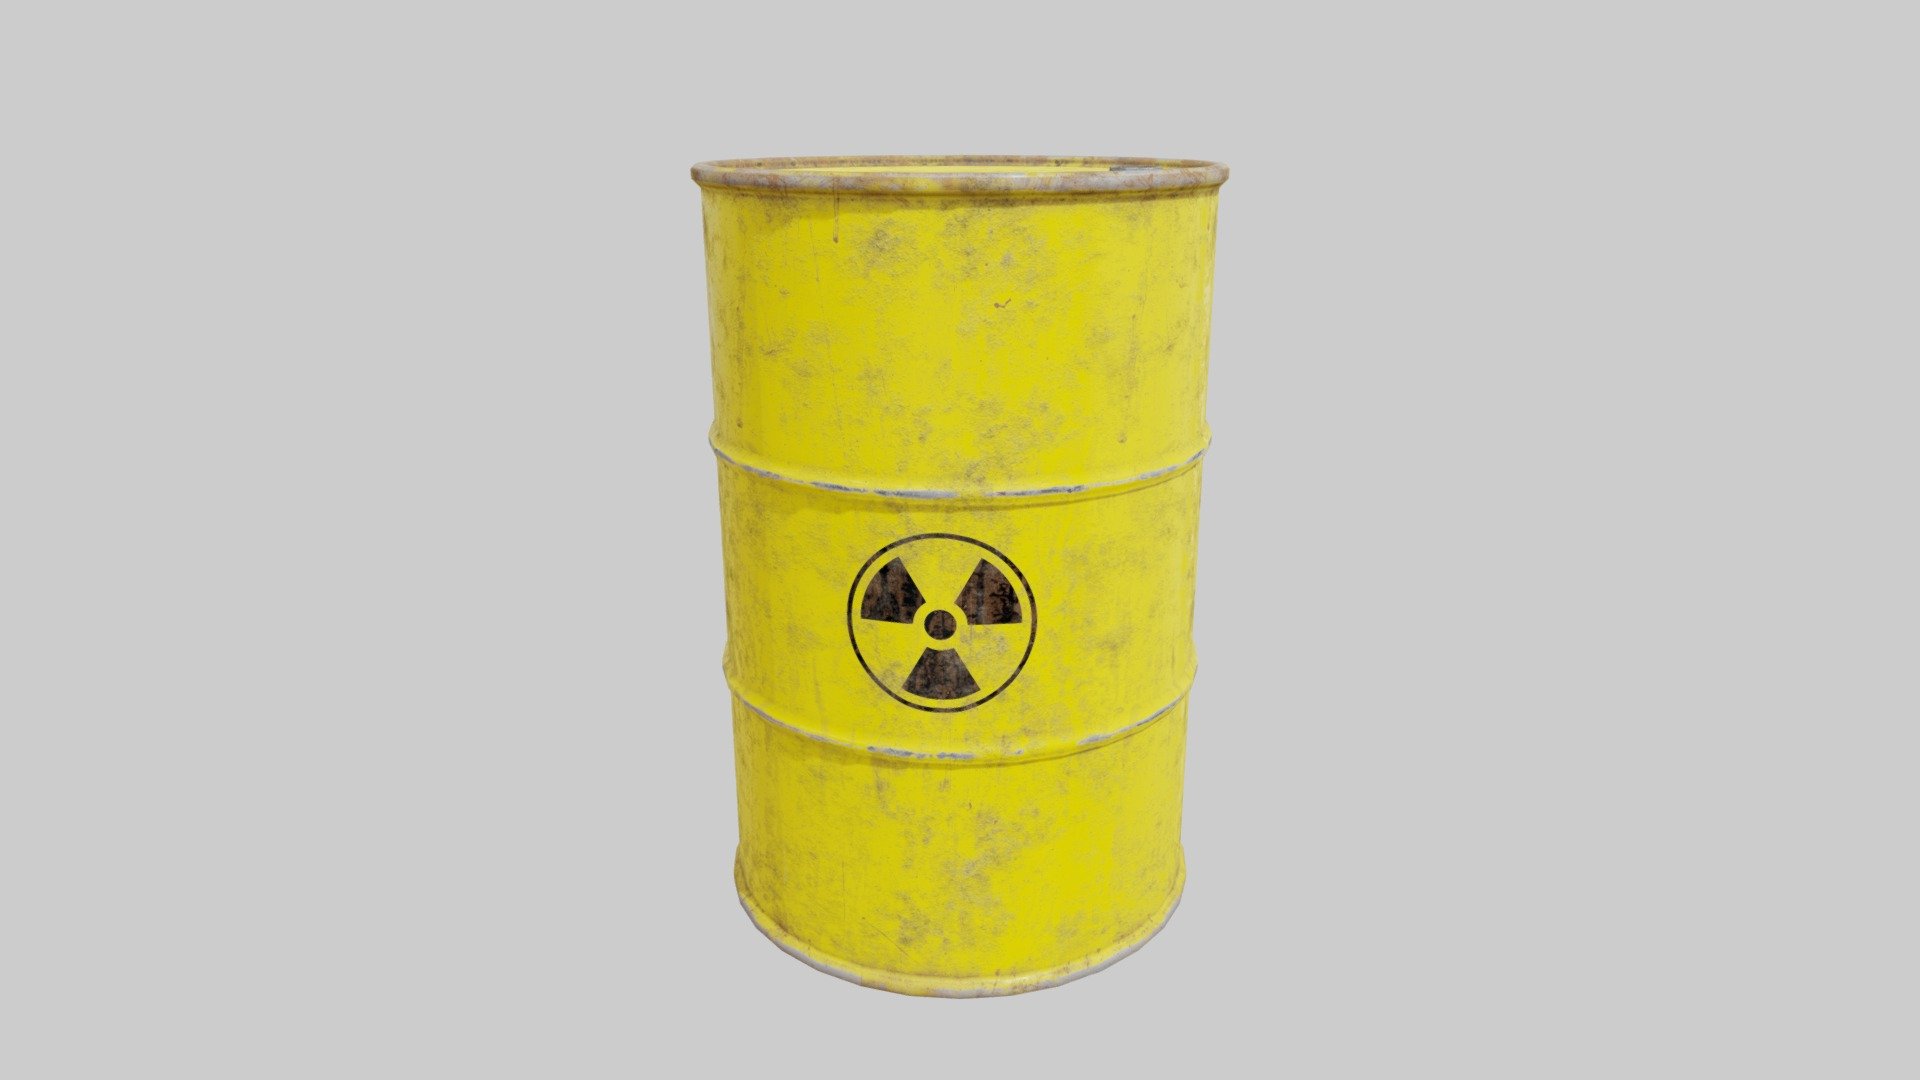 This asset is licensed under CC0 (No Rights Reserved) license. You can use it wherever and however you want.

If you find it useful, you may consider buying me a coffee: https://ko-fi.com/cc03d

Get more CC0 3D assets on https://cc03d.com/ - Used Old Oil Barrel 1 | CC0 - Download Free 3D model by cc03d.com (@cc03d) 3d model